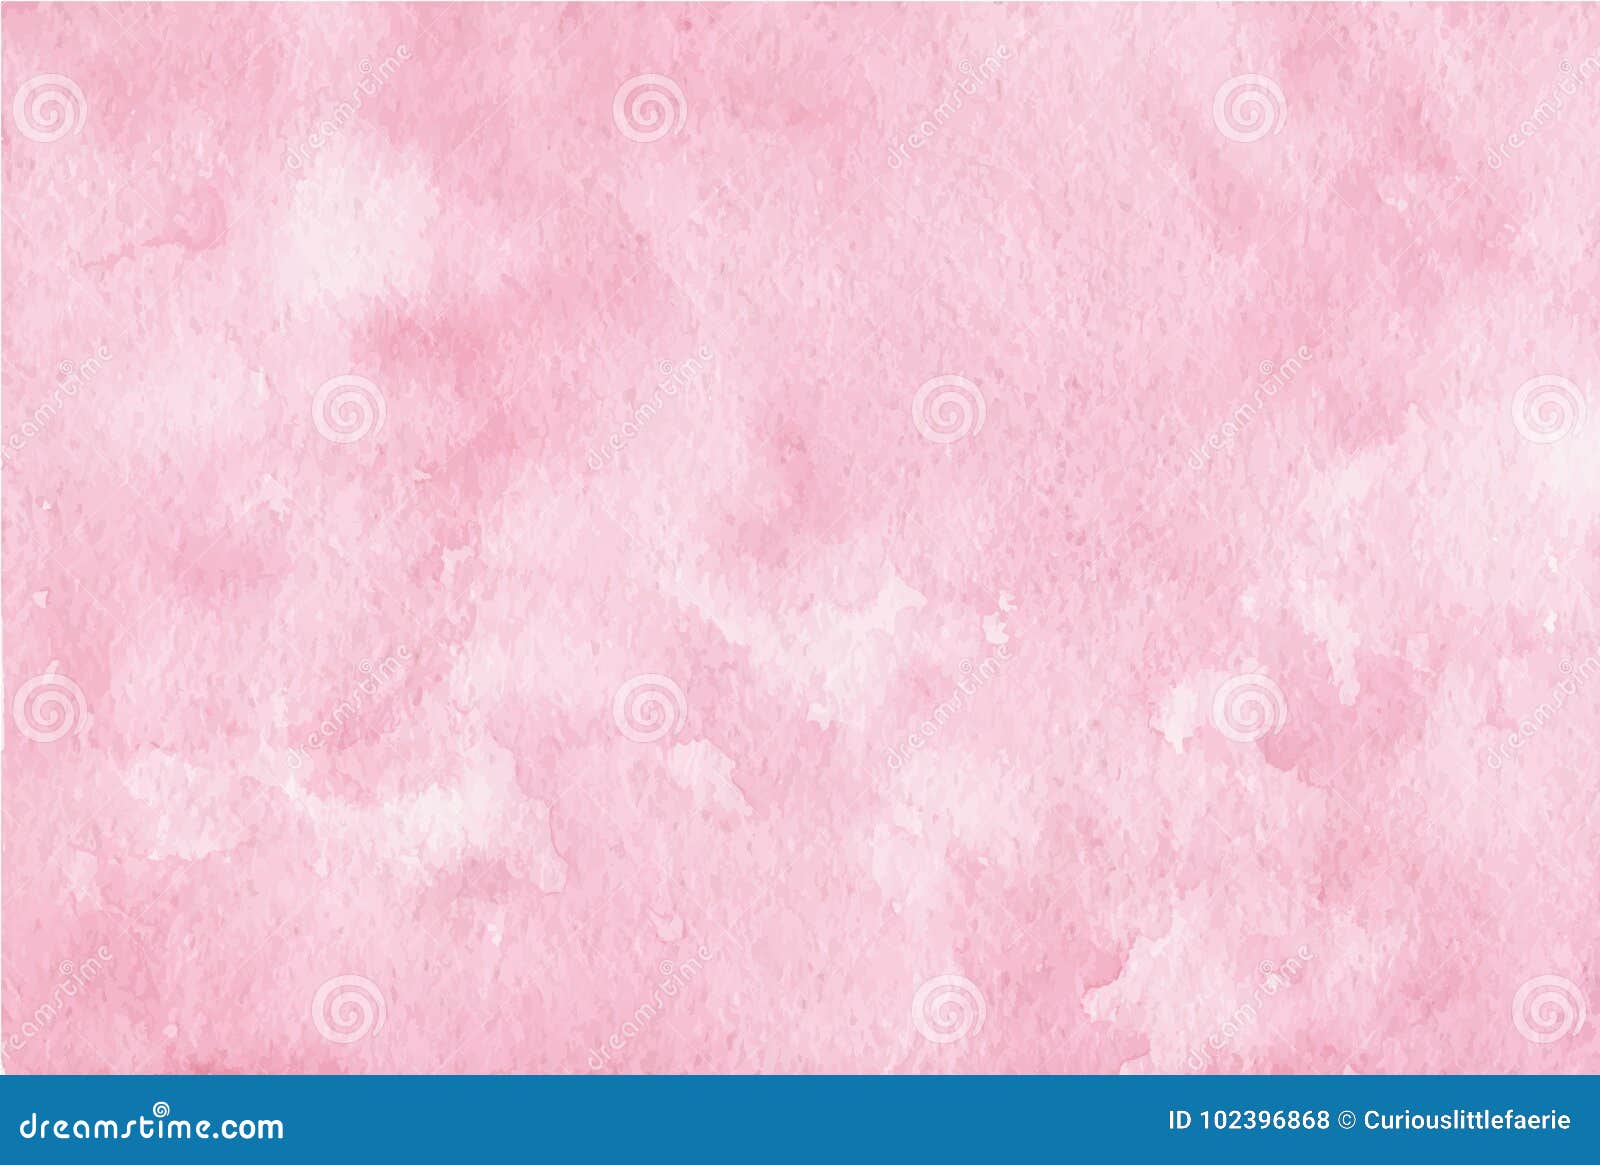  hand painted pink watercolor background. usable as a texture for